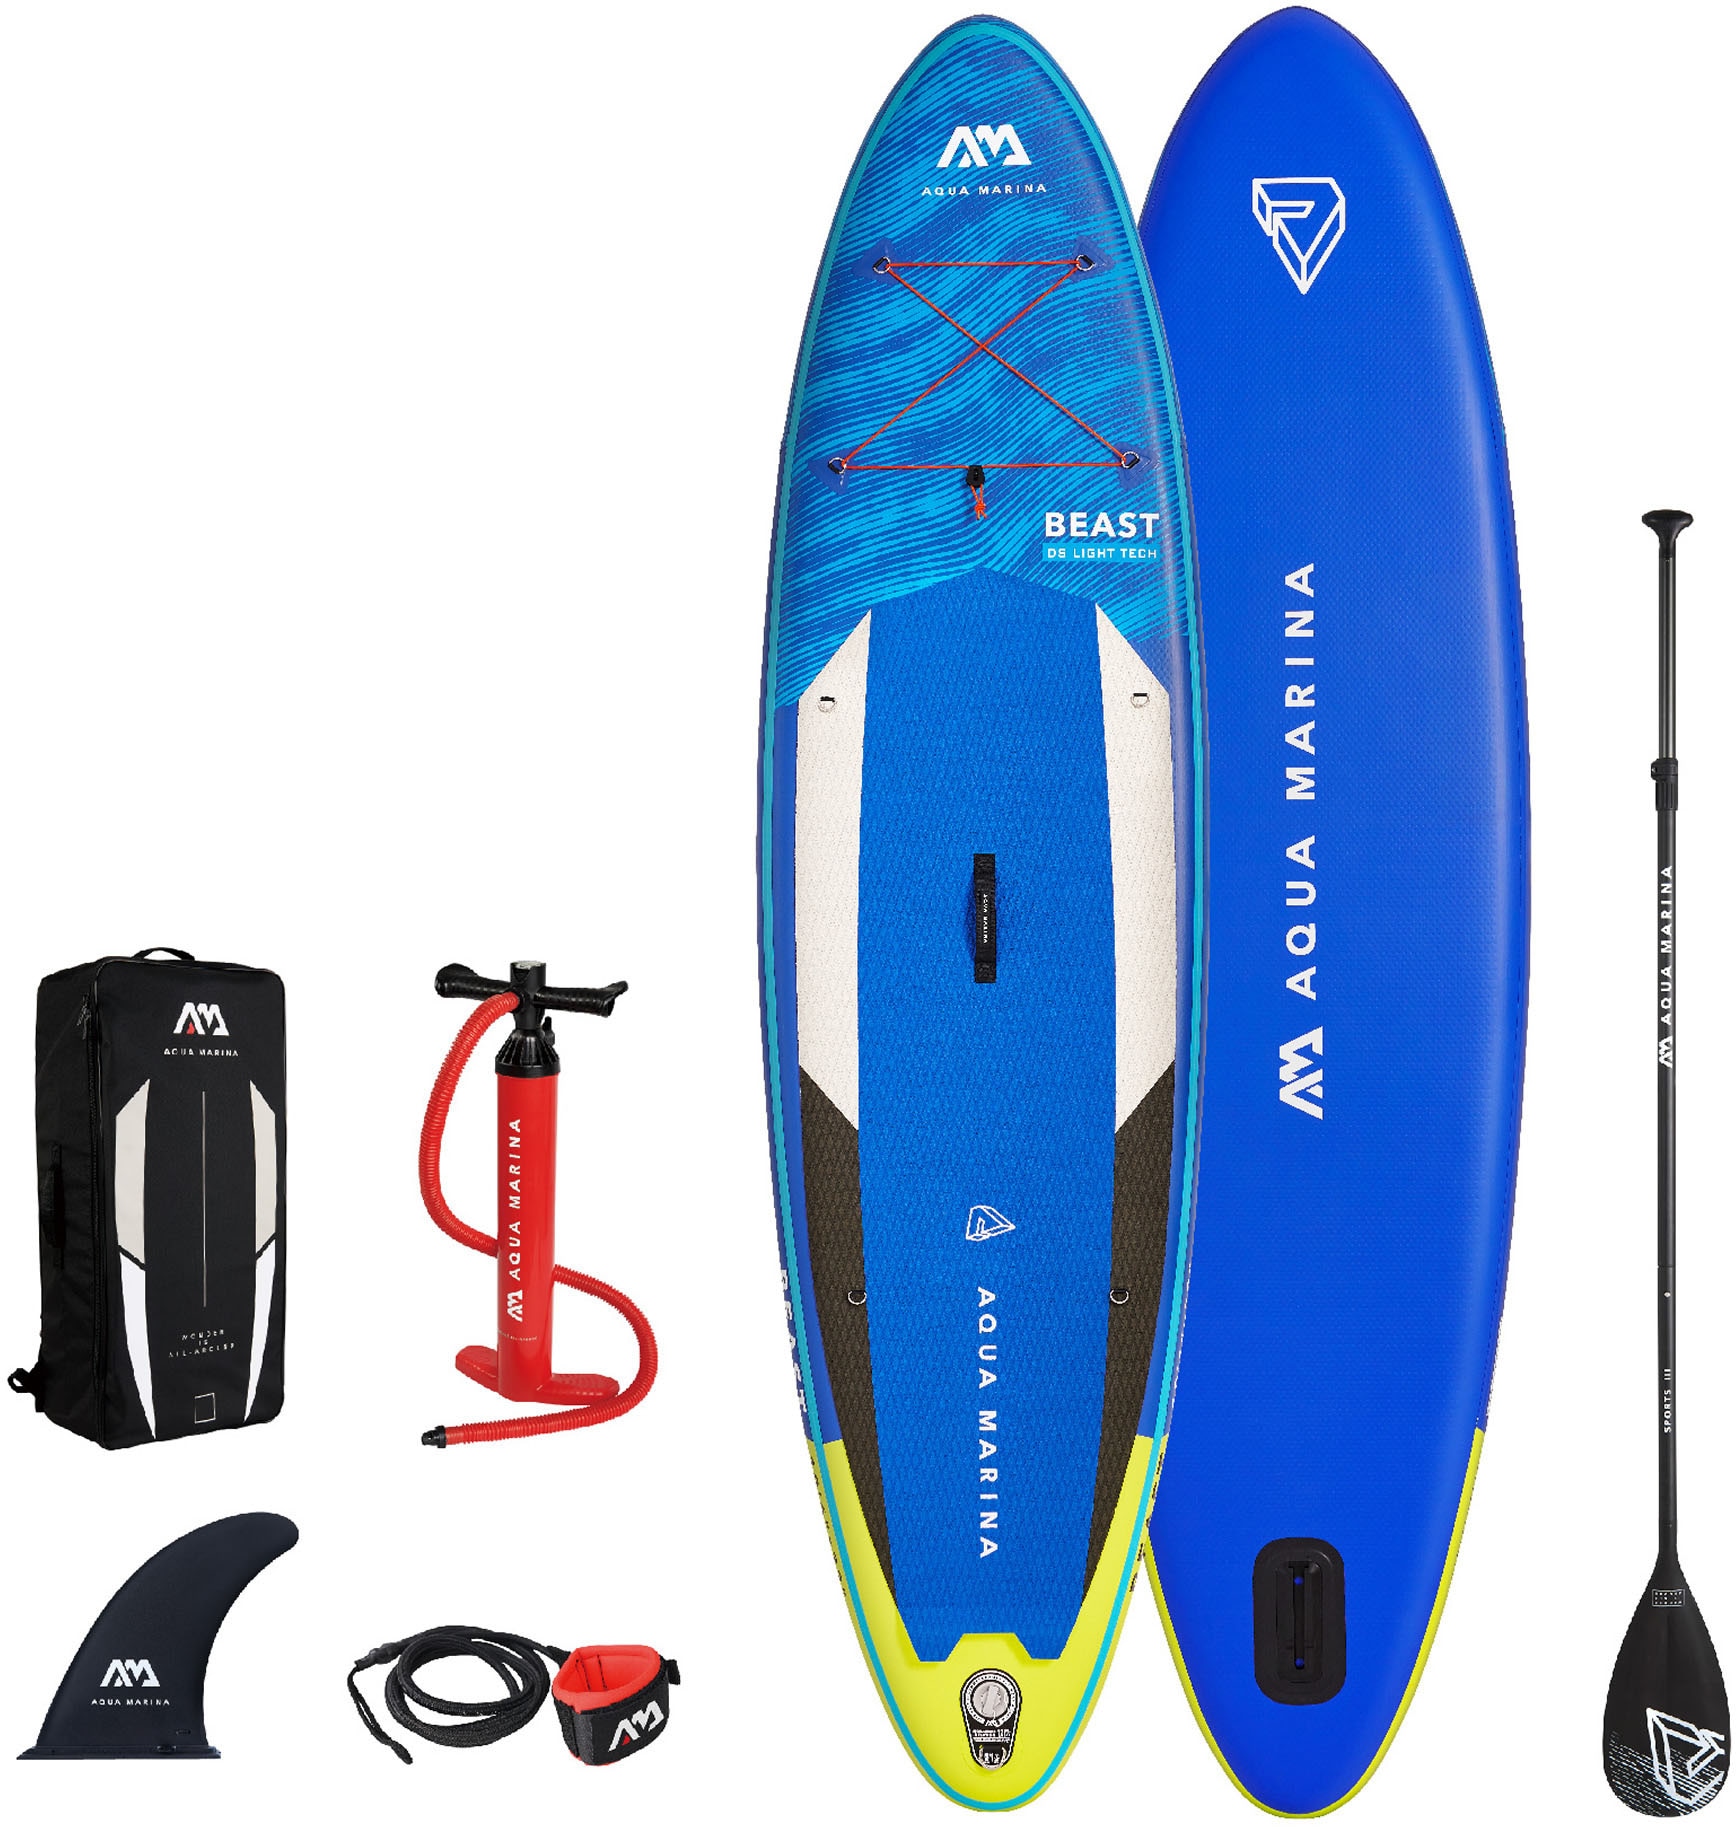 Paddle | kaufen online bei jetzt Stand-Up SUP-Boards